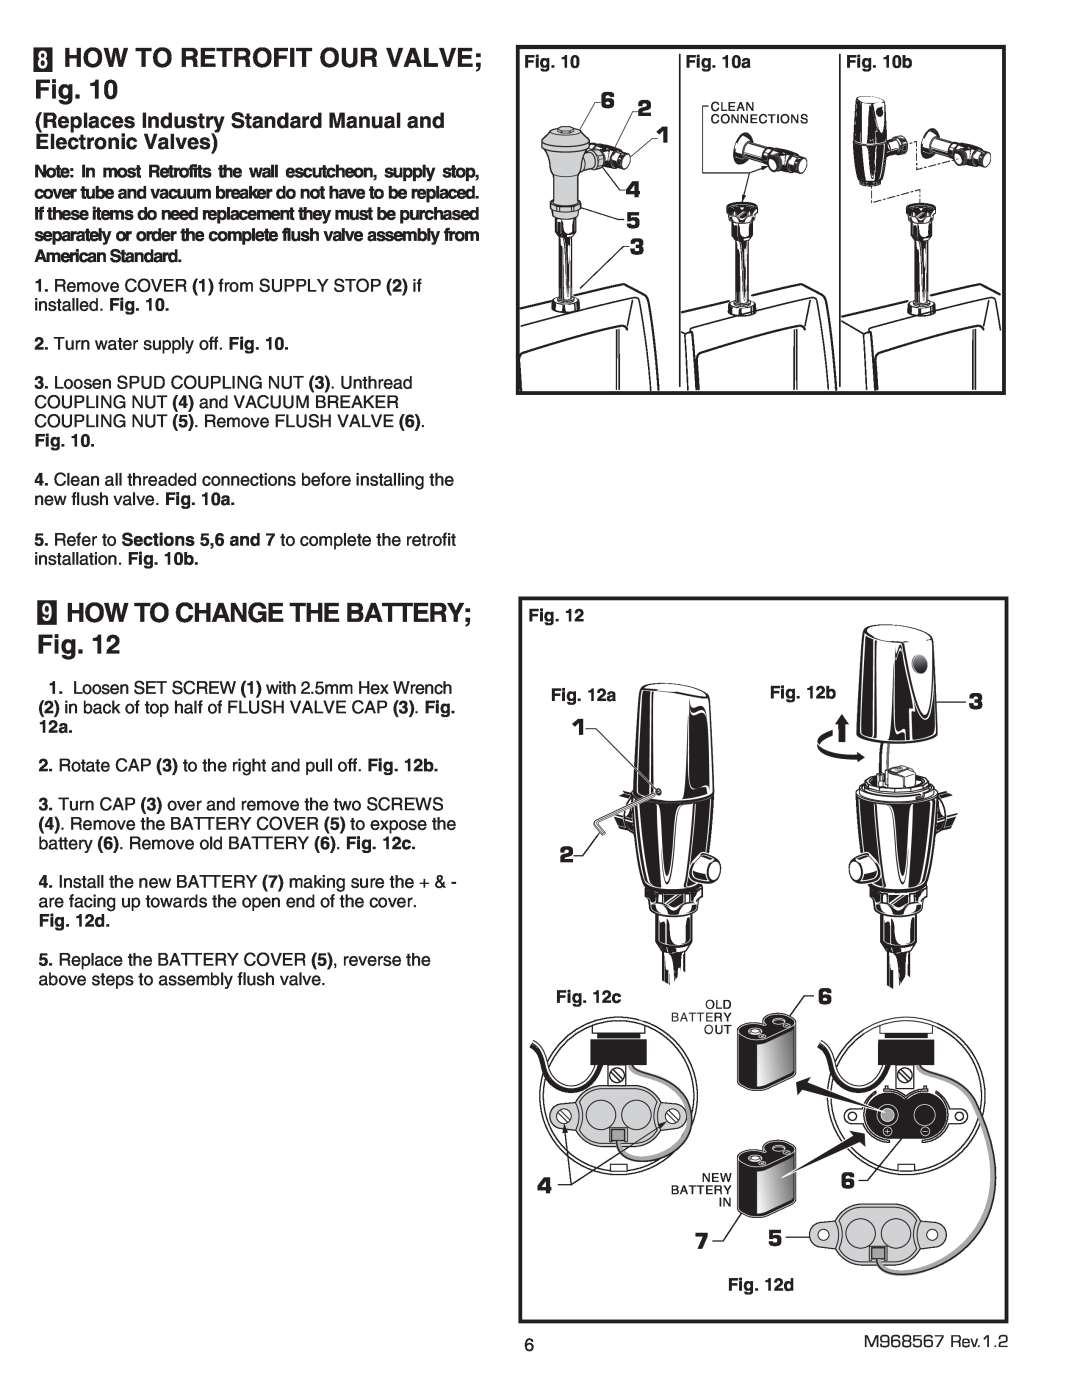 American Standard 6063.101, 6063.505, 6063.051, 6063.510 8HOW TO RETROFIT OUR VALVE Fig, 9HOW TO CHANGE THE BATTERY Fig, 1 4 